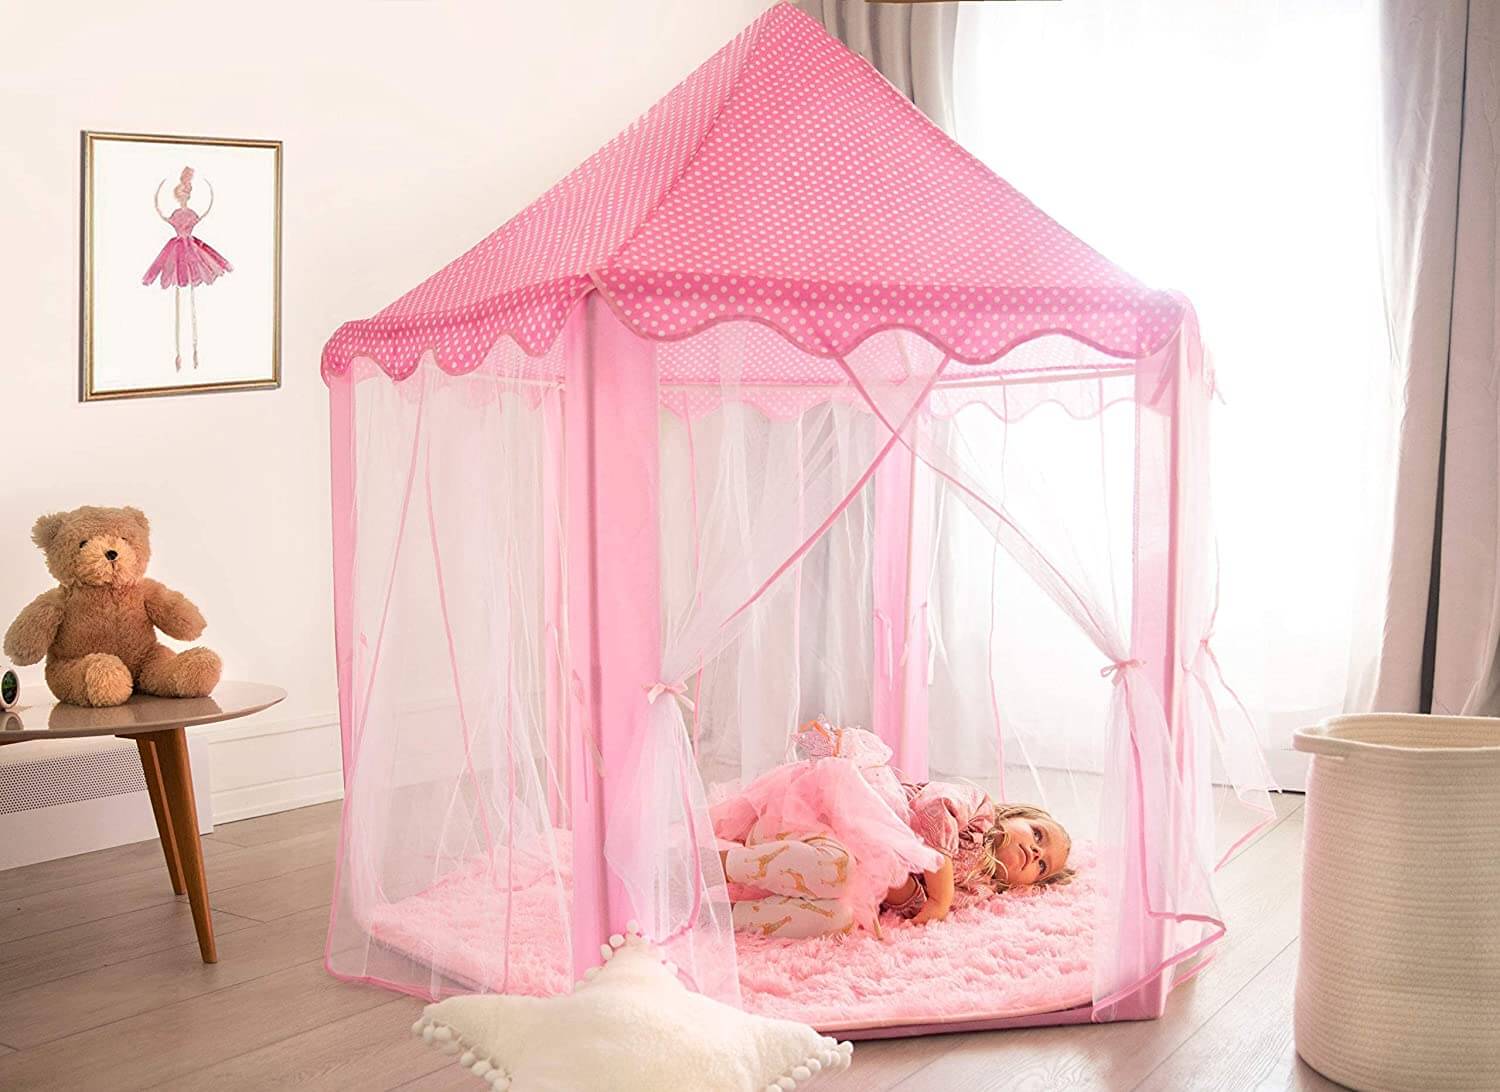 Pink Princess Castle Play Tent with Led Star Lights - LINWEY - Best Pink Princess Castle Play Tent with Led Star Lights